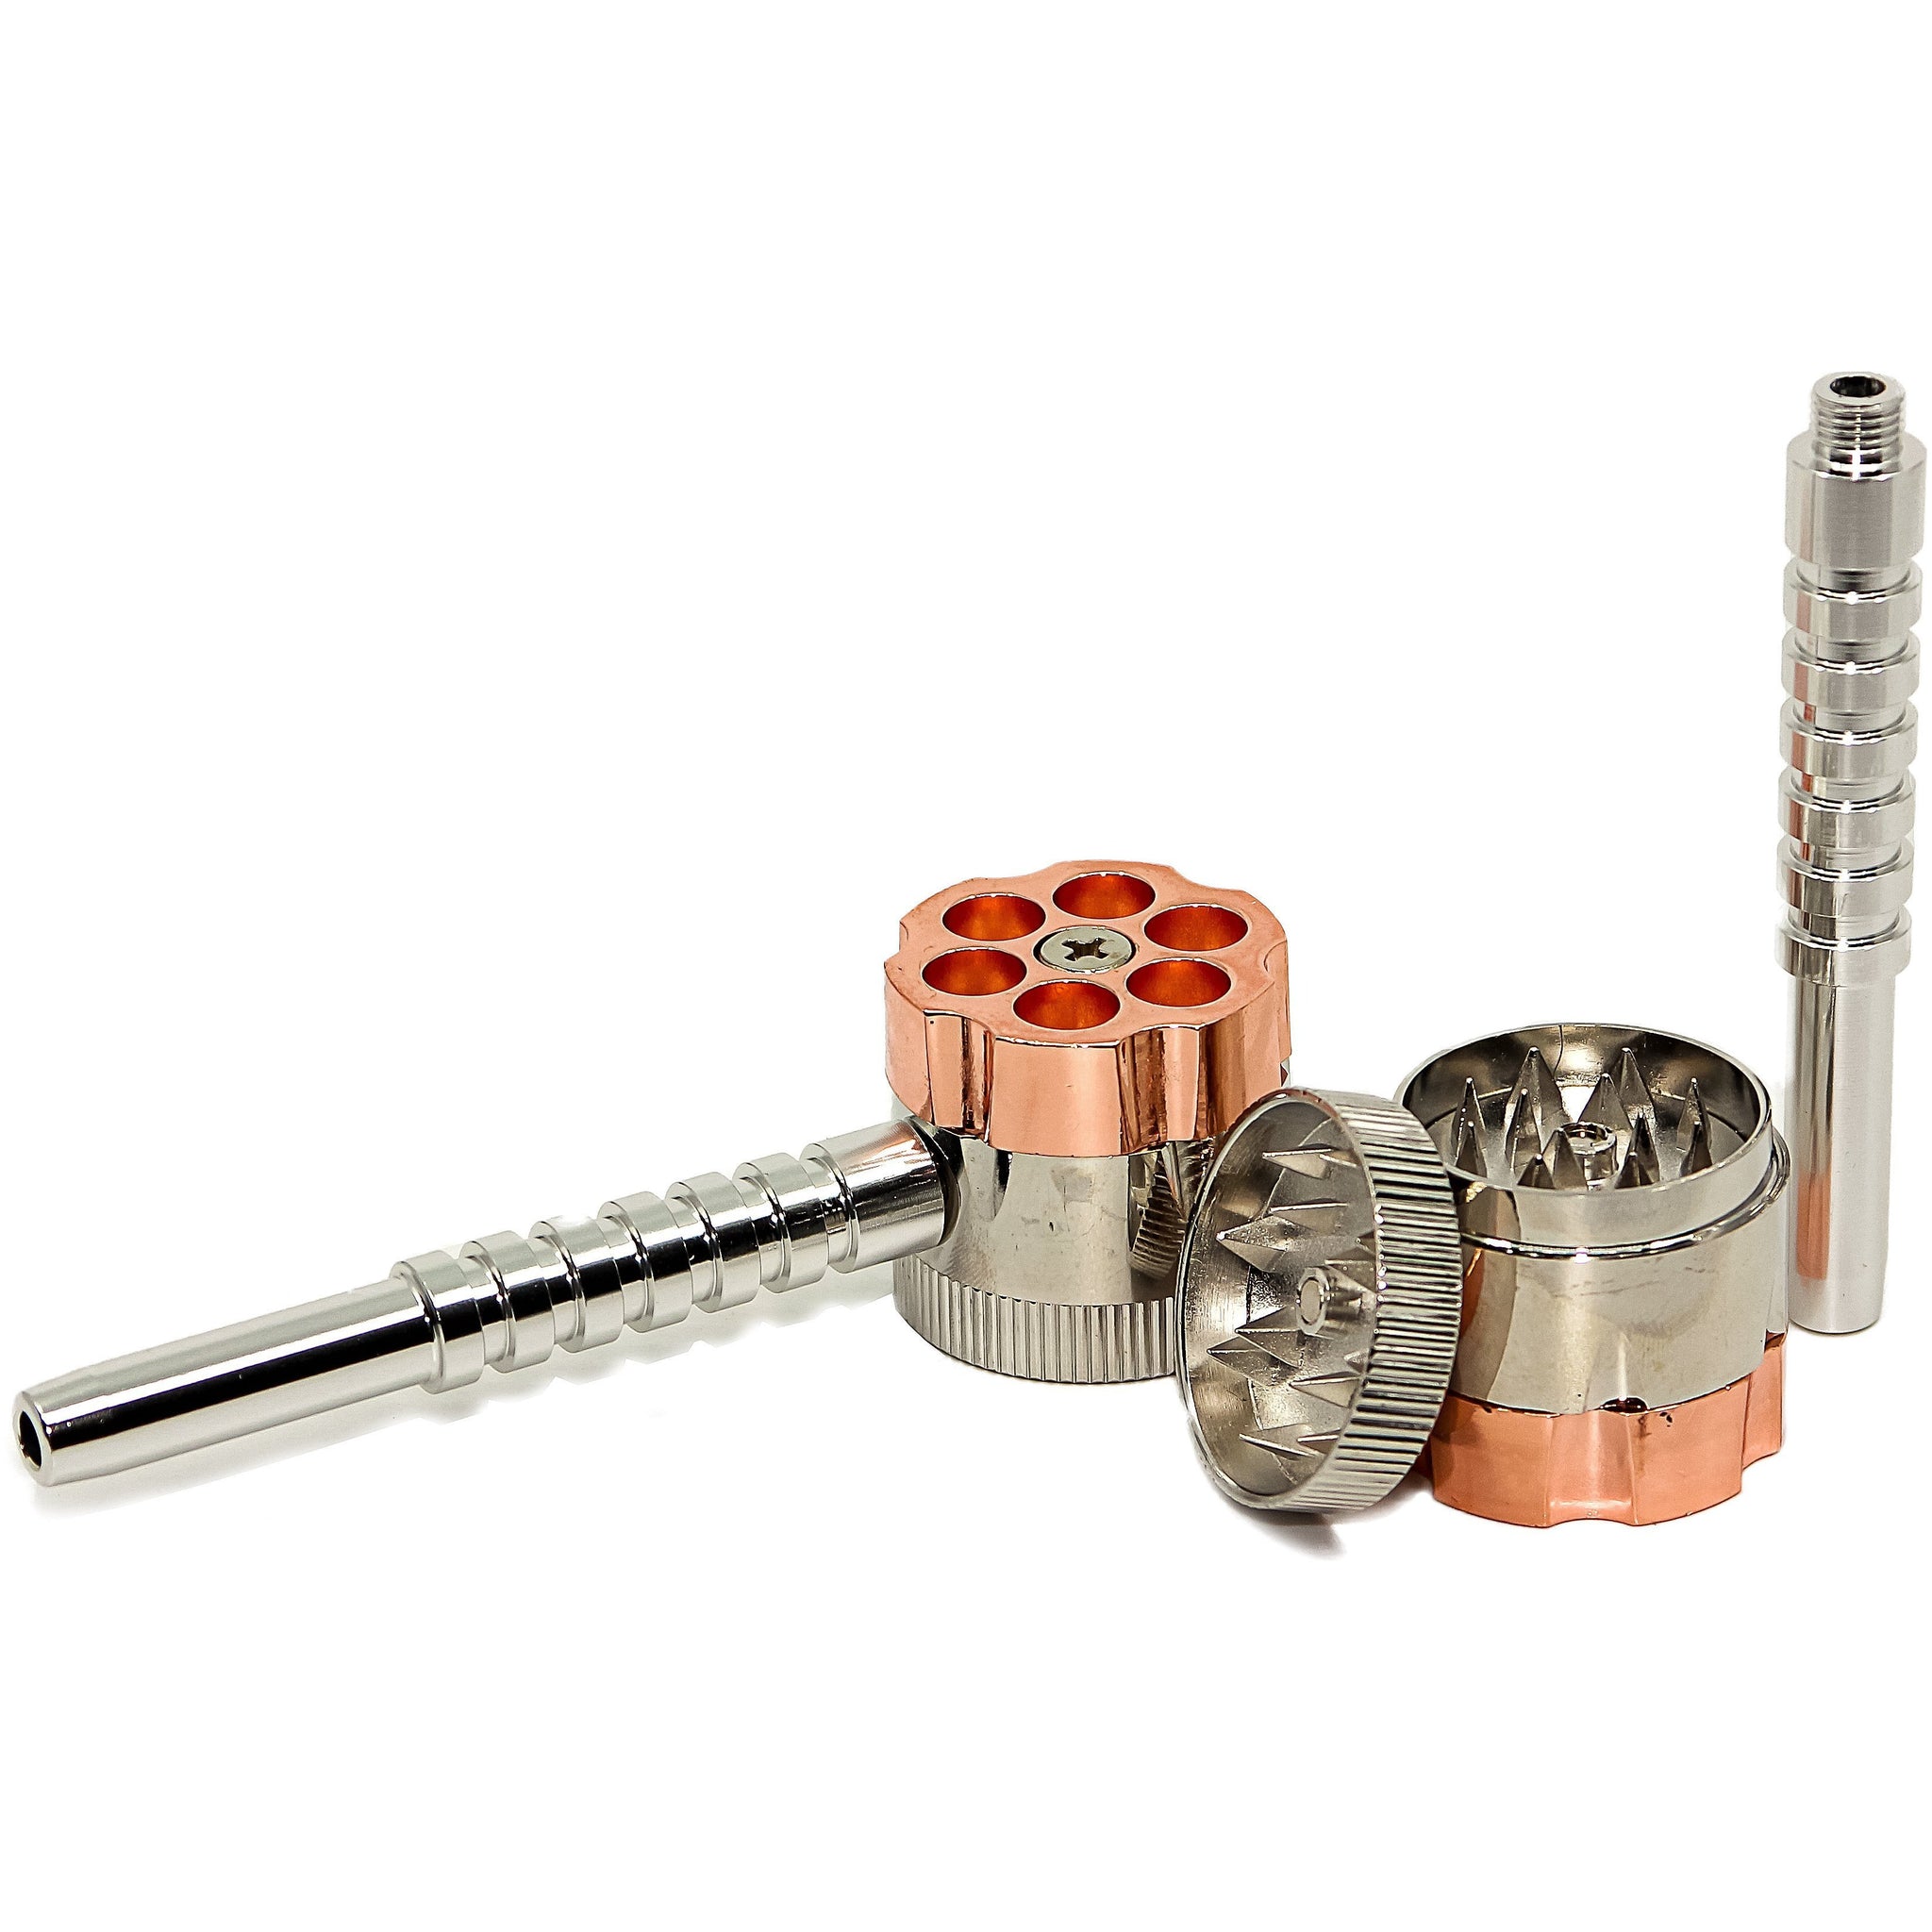 6-Shooter Pipe w/ Attached Grinder (1.2")(30mm) n/a 